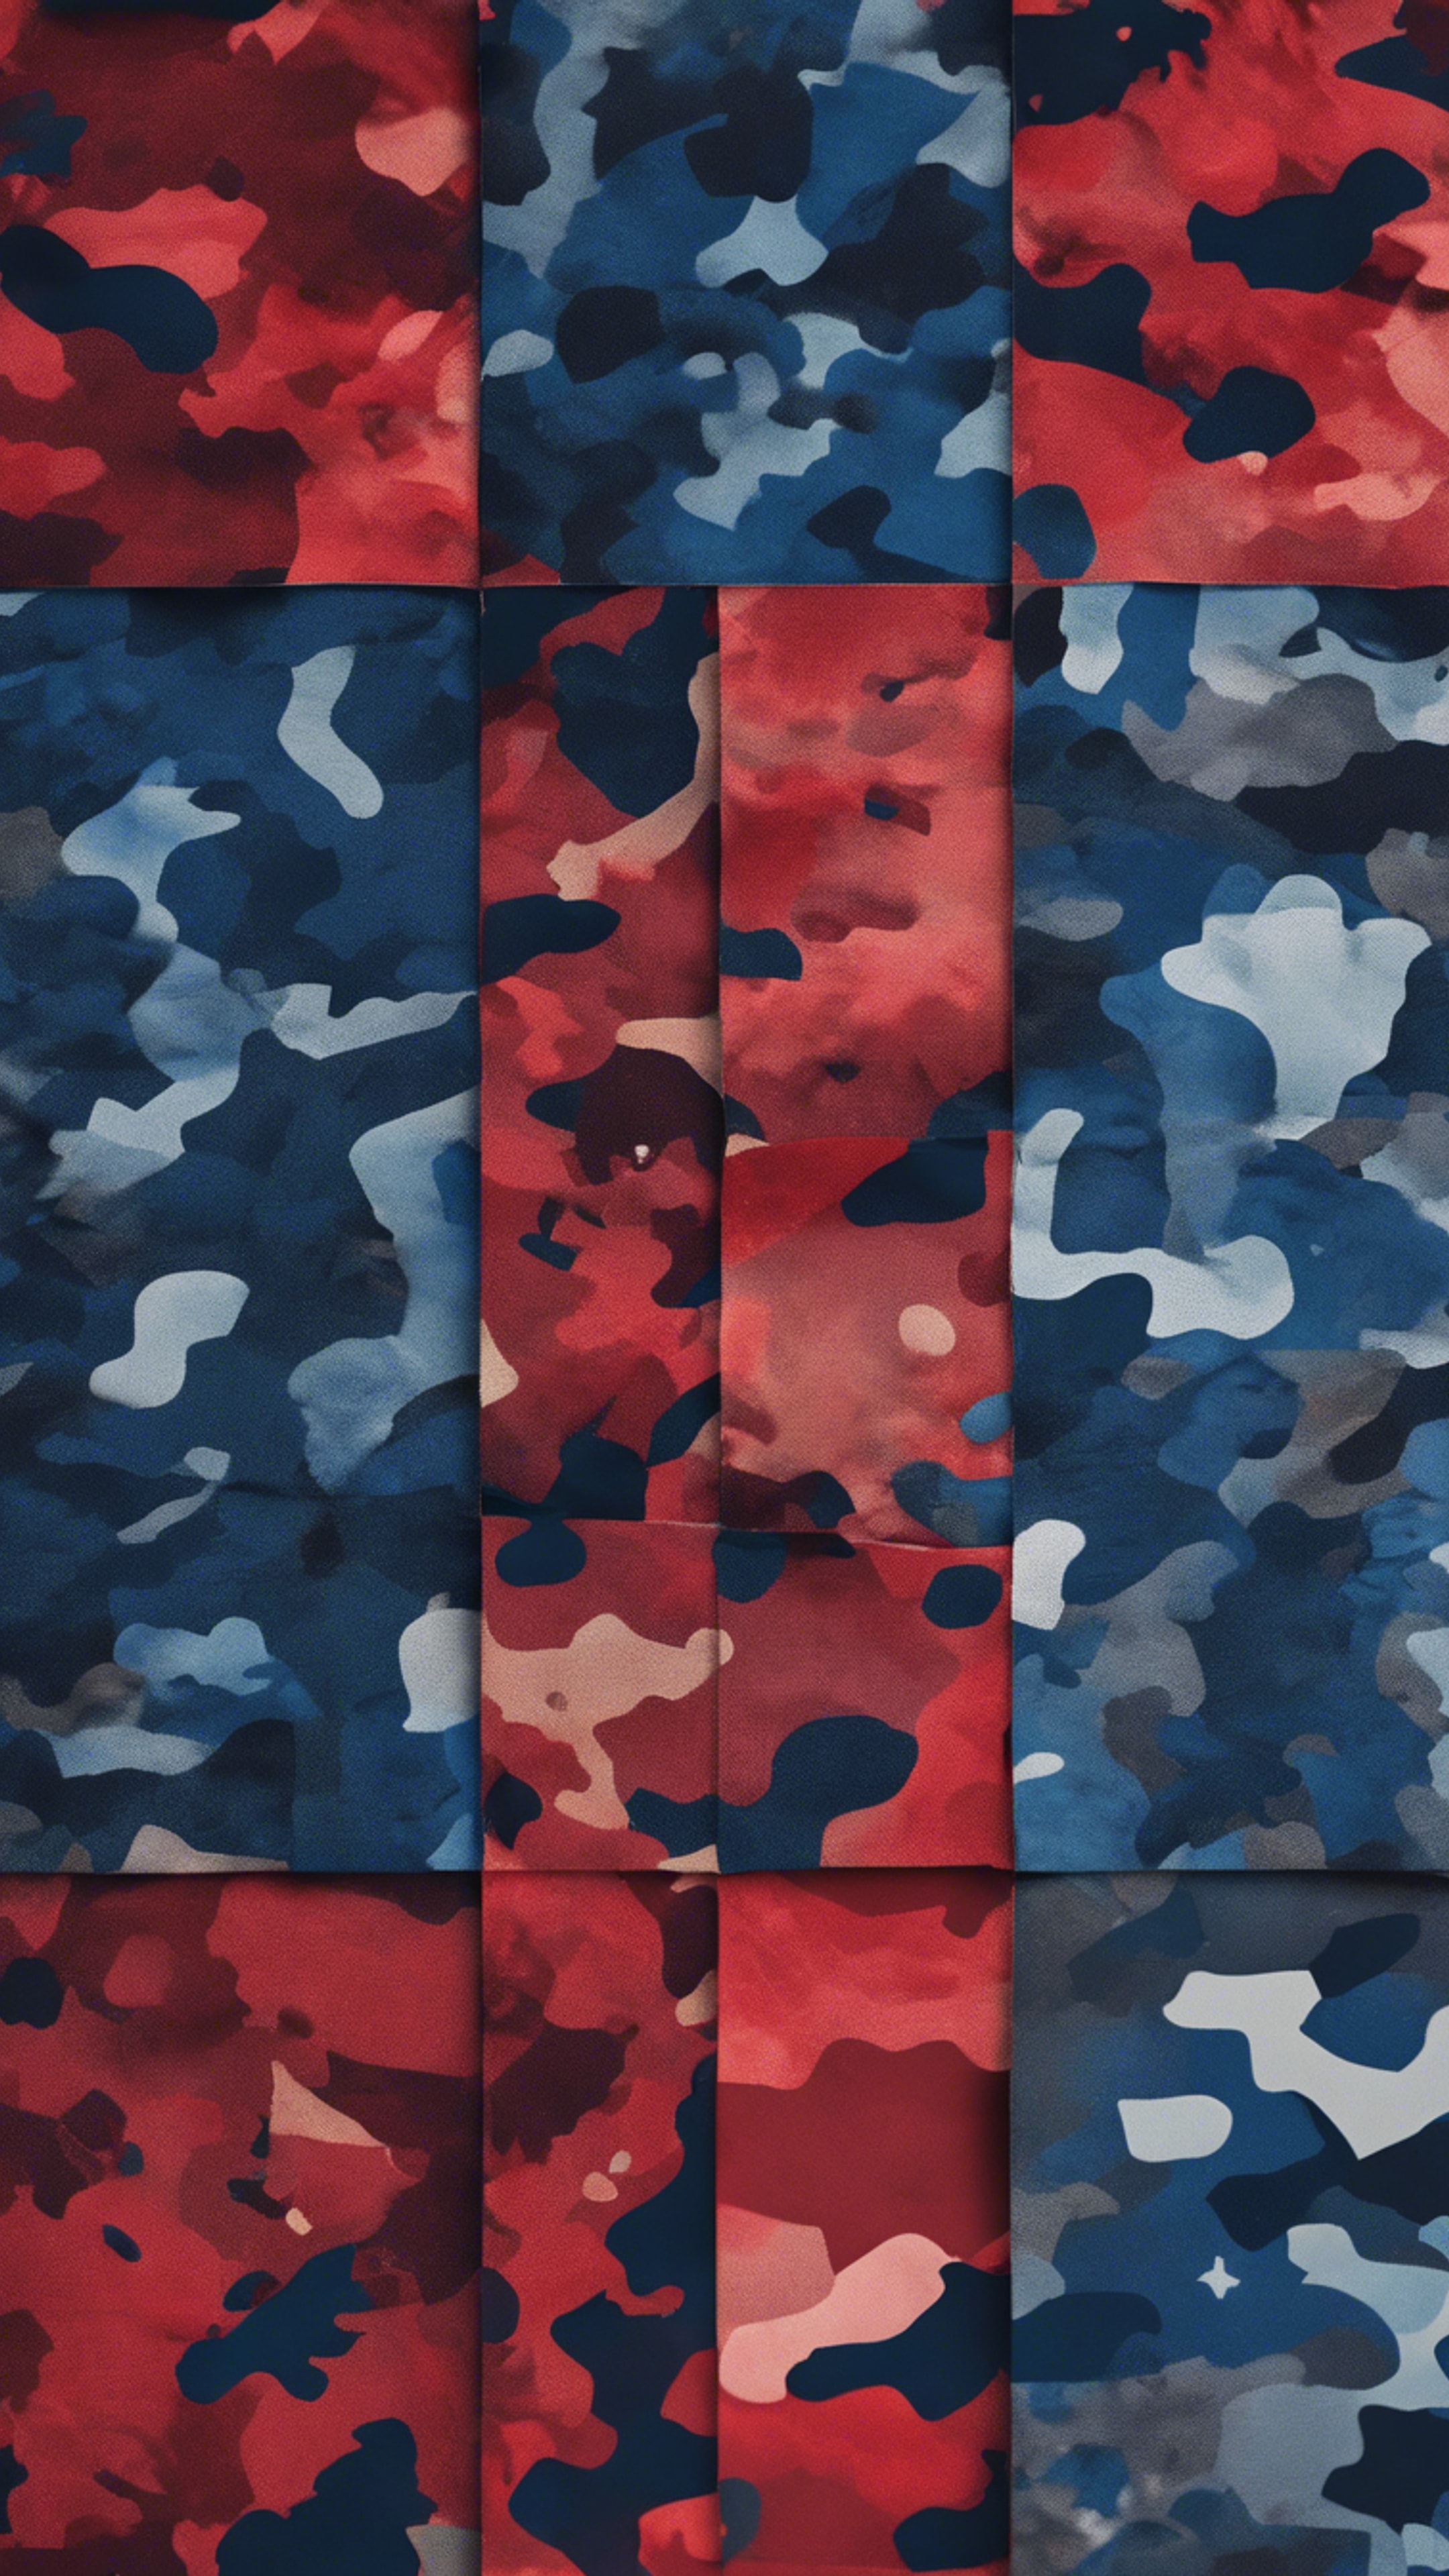 Wide patches of red and blue in a modernized camouflage pattern. Tapeta[bf2d18a8e46c447ea6e3]